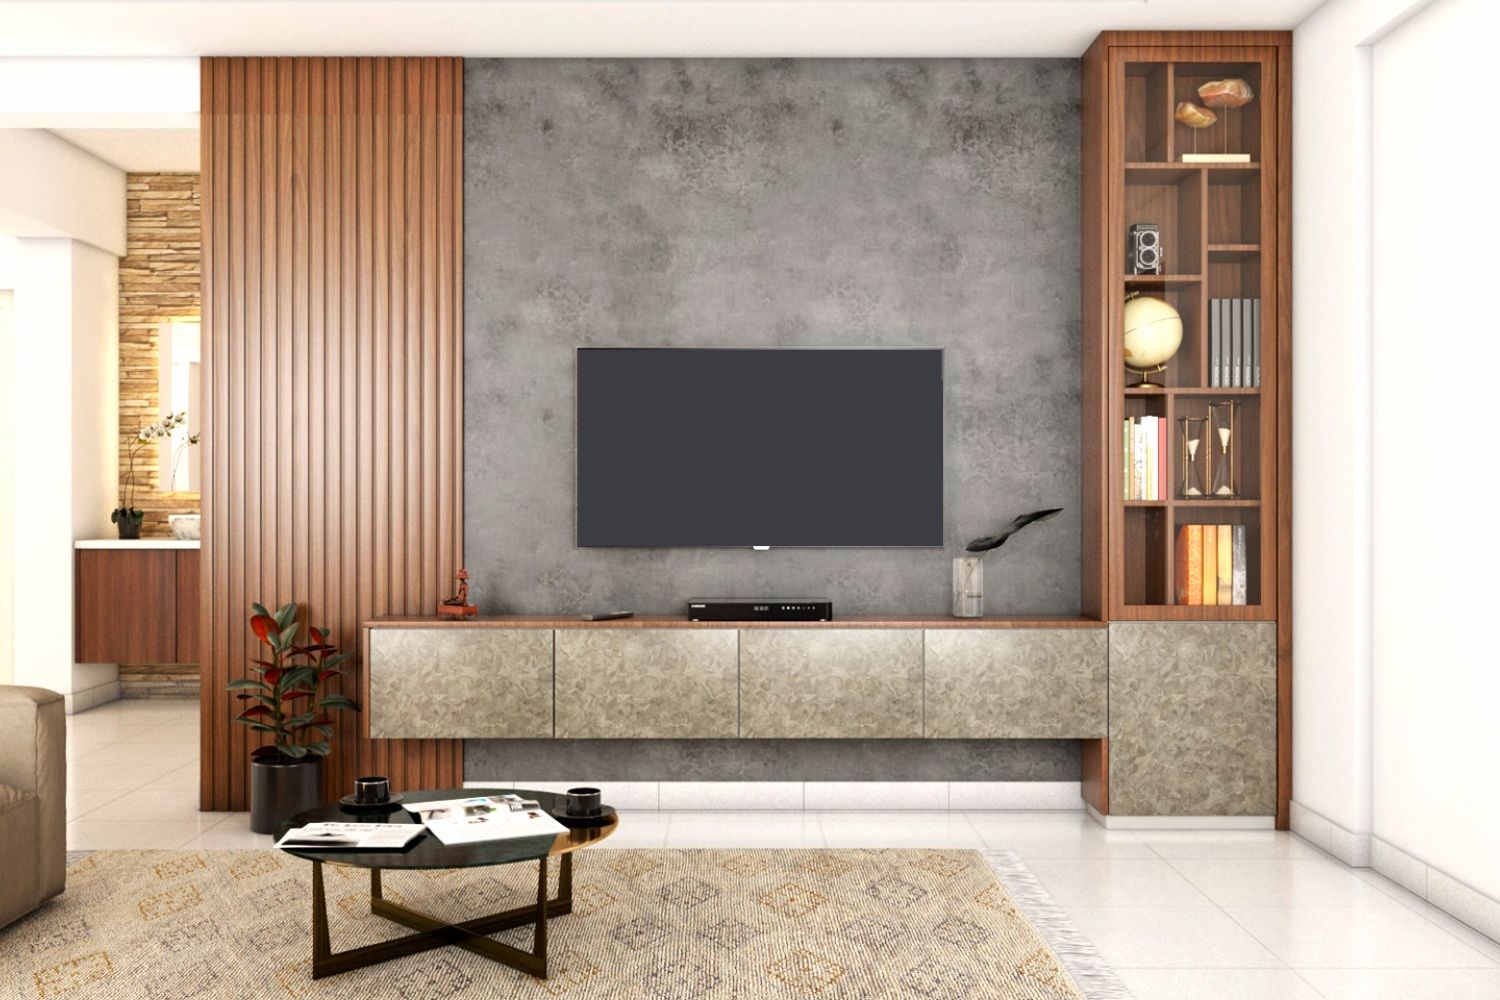 Contemporary TV Unit Design With Grey Accent Wall And Wooden Fluted Panels